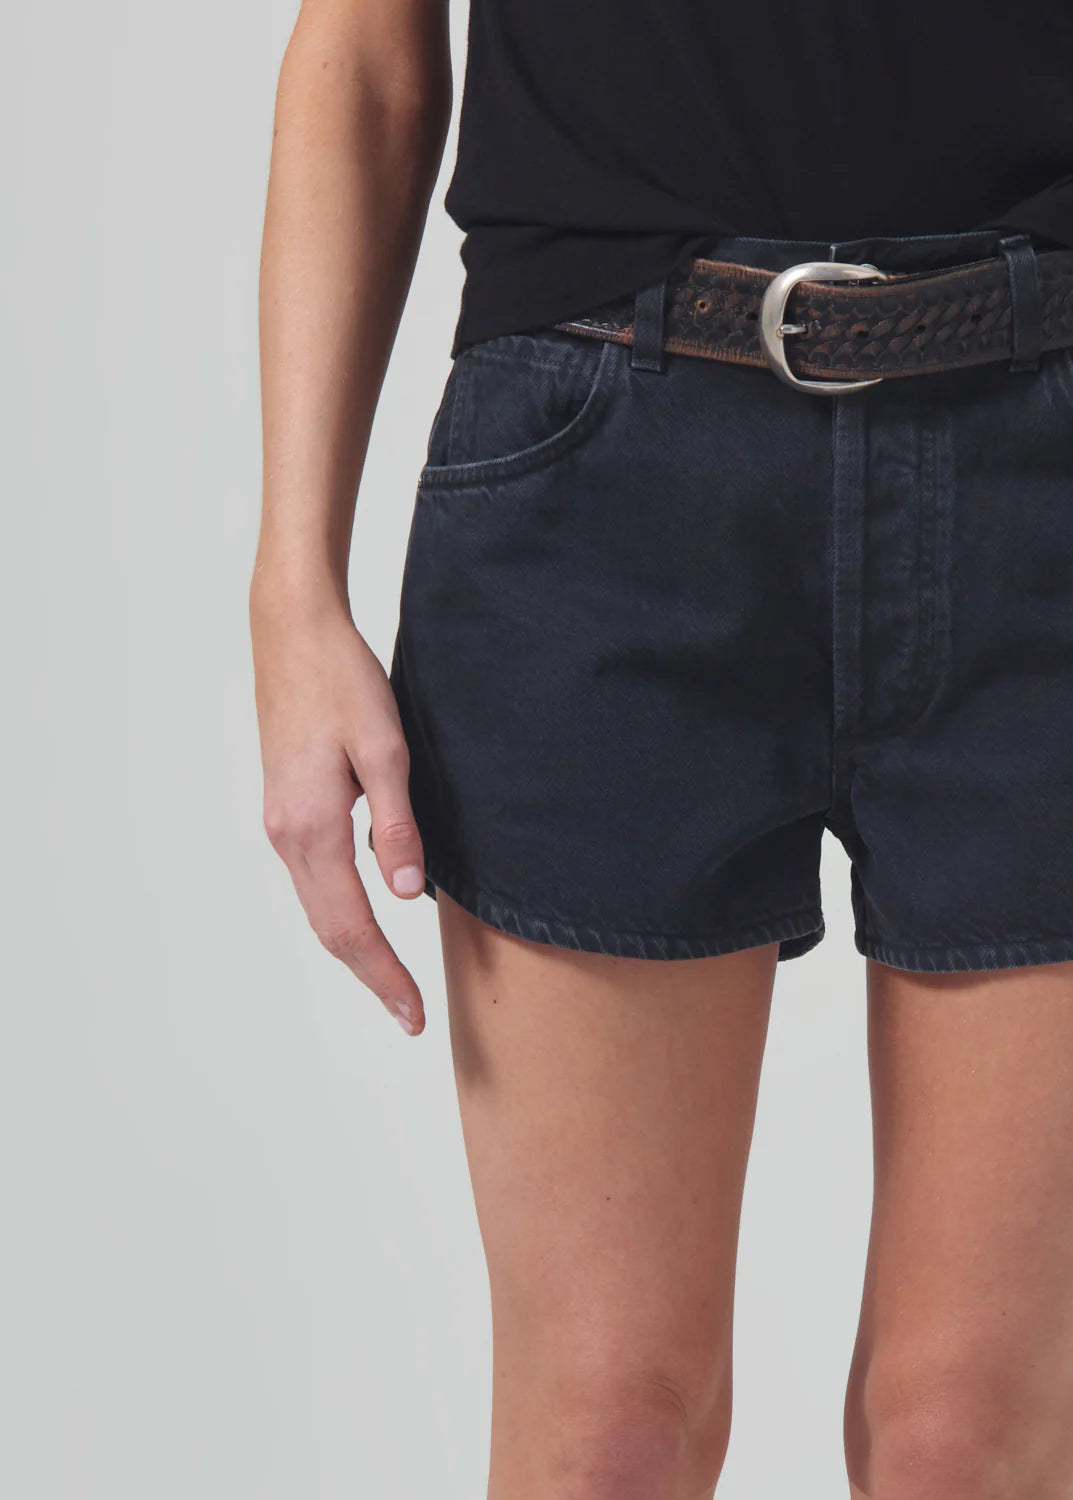 ABITA SHORT IN WASHED BLACK - Romi Boutique